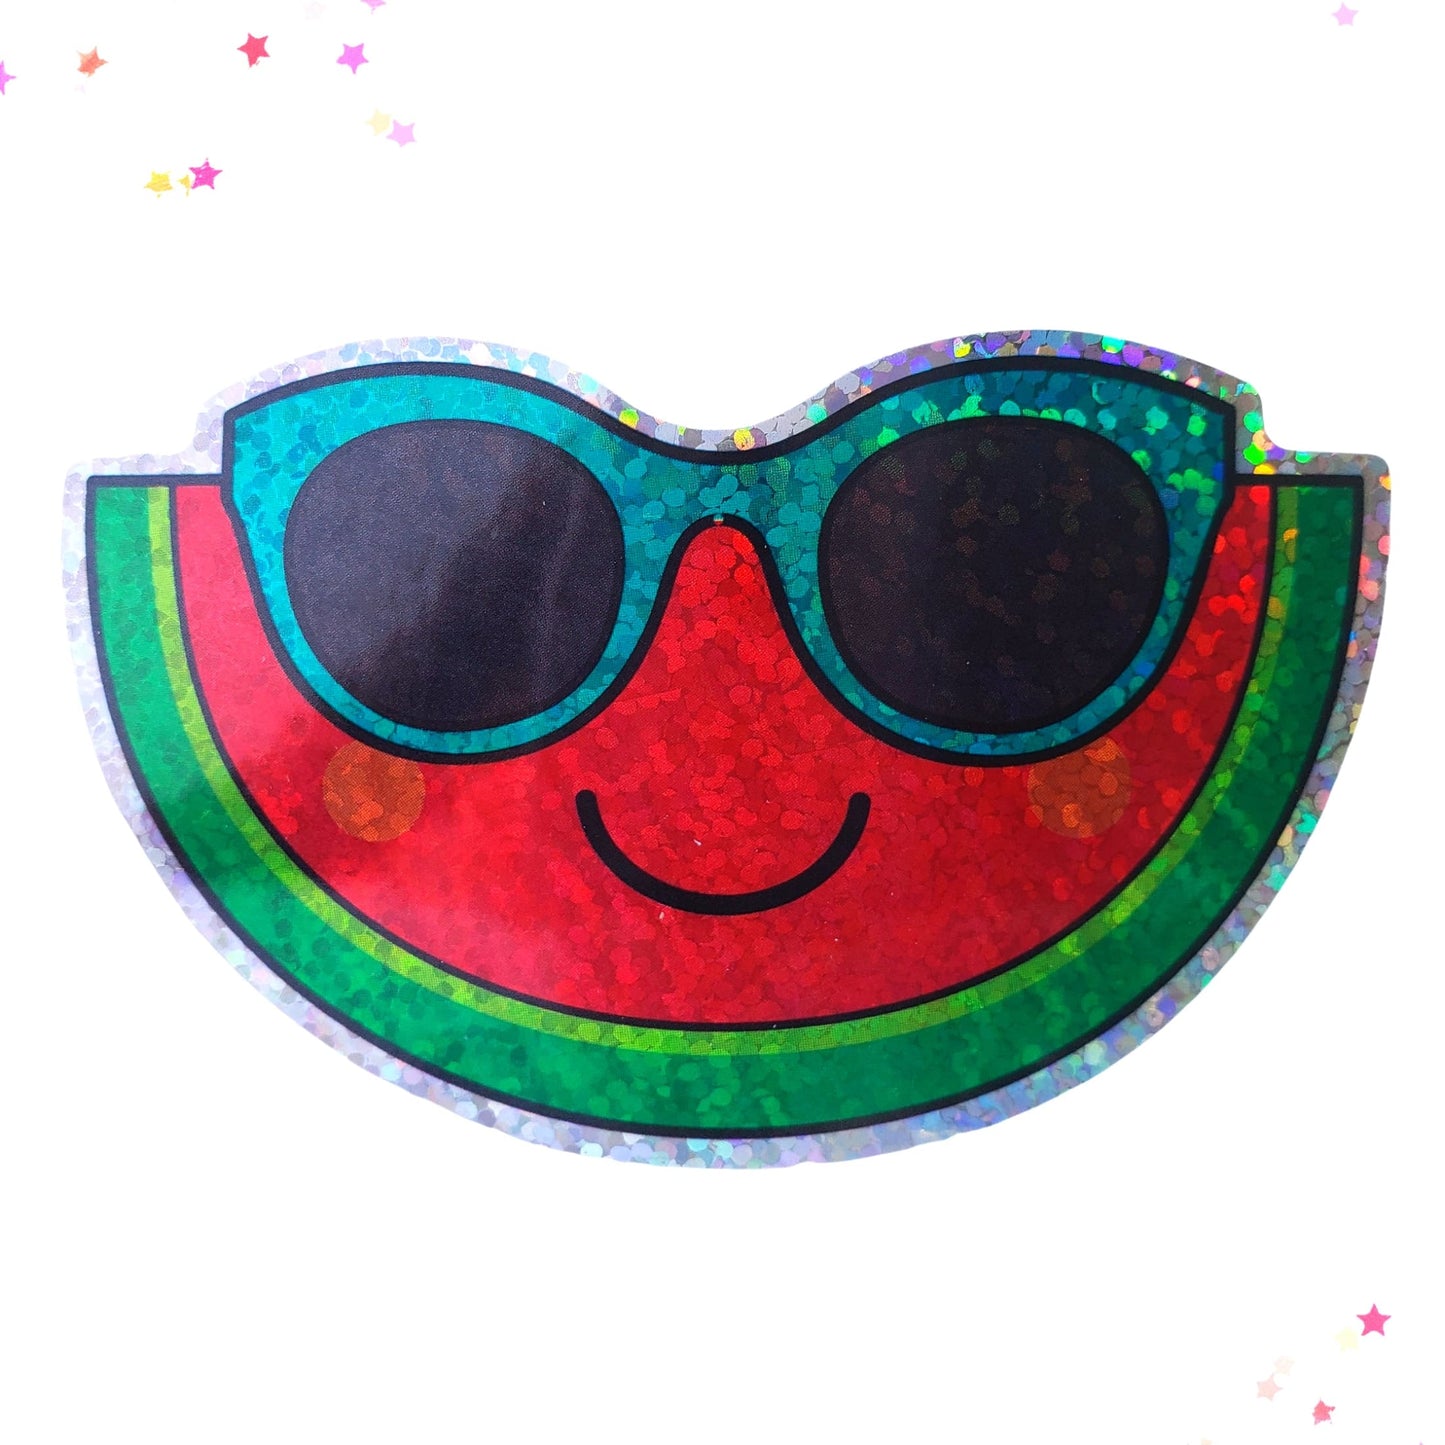 Premium Sticker - Sparkly Holographic Glitter Watermelon in Sunglasses from Confetti Kitty, Only 2.0